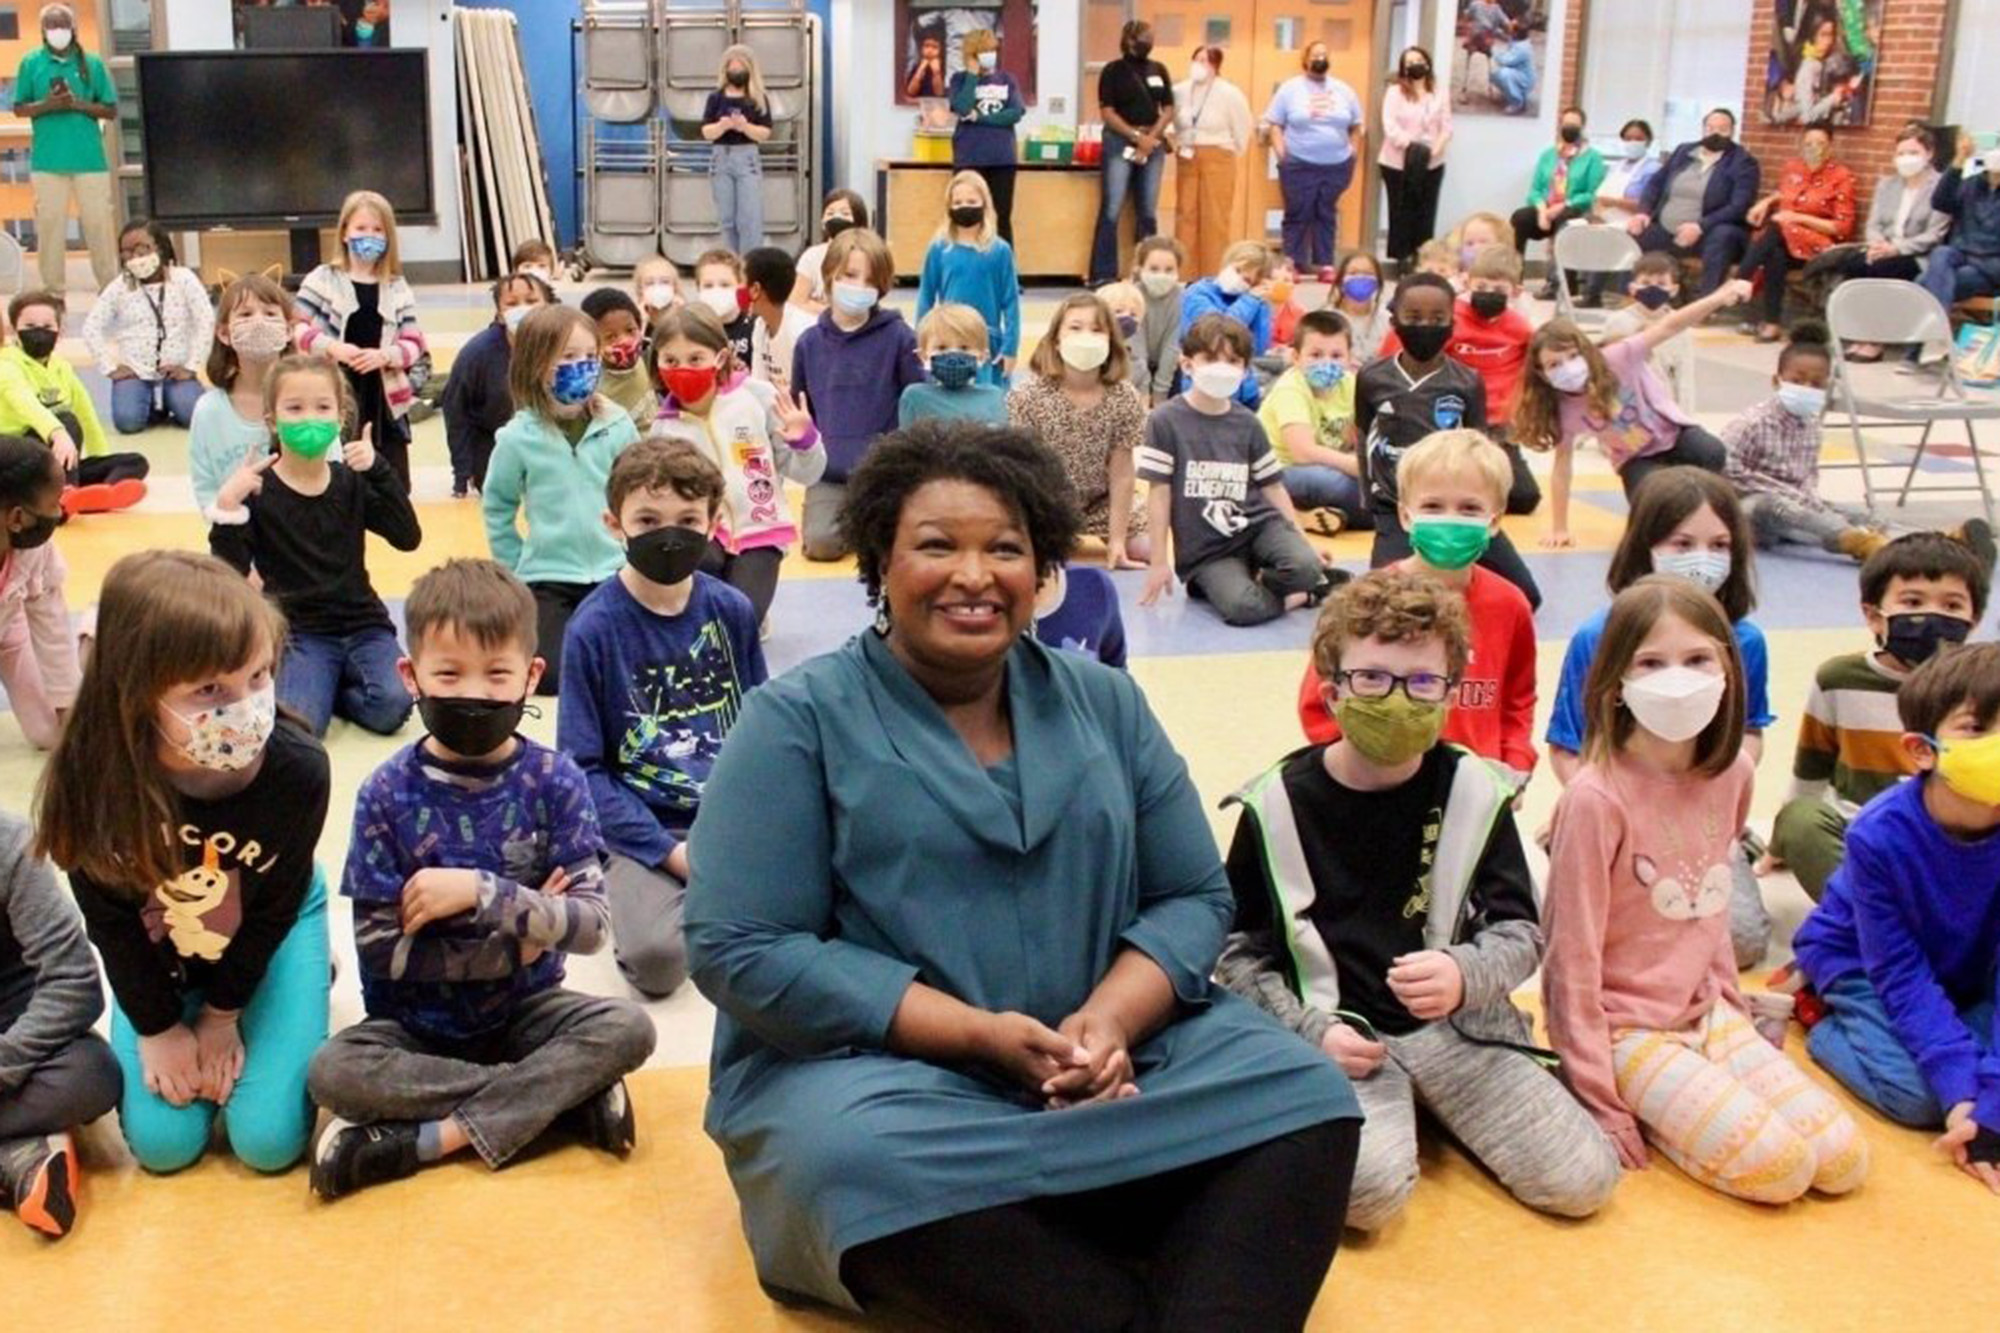 Stacey Abrams appeared maskless in photos alongside elementary school children. Twitter/@staceyabrams